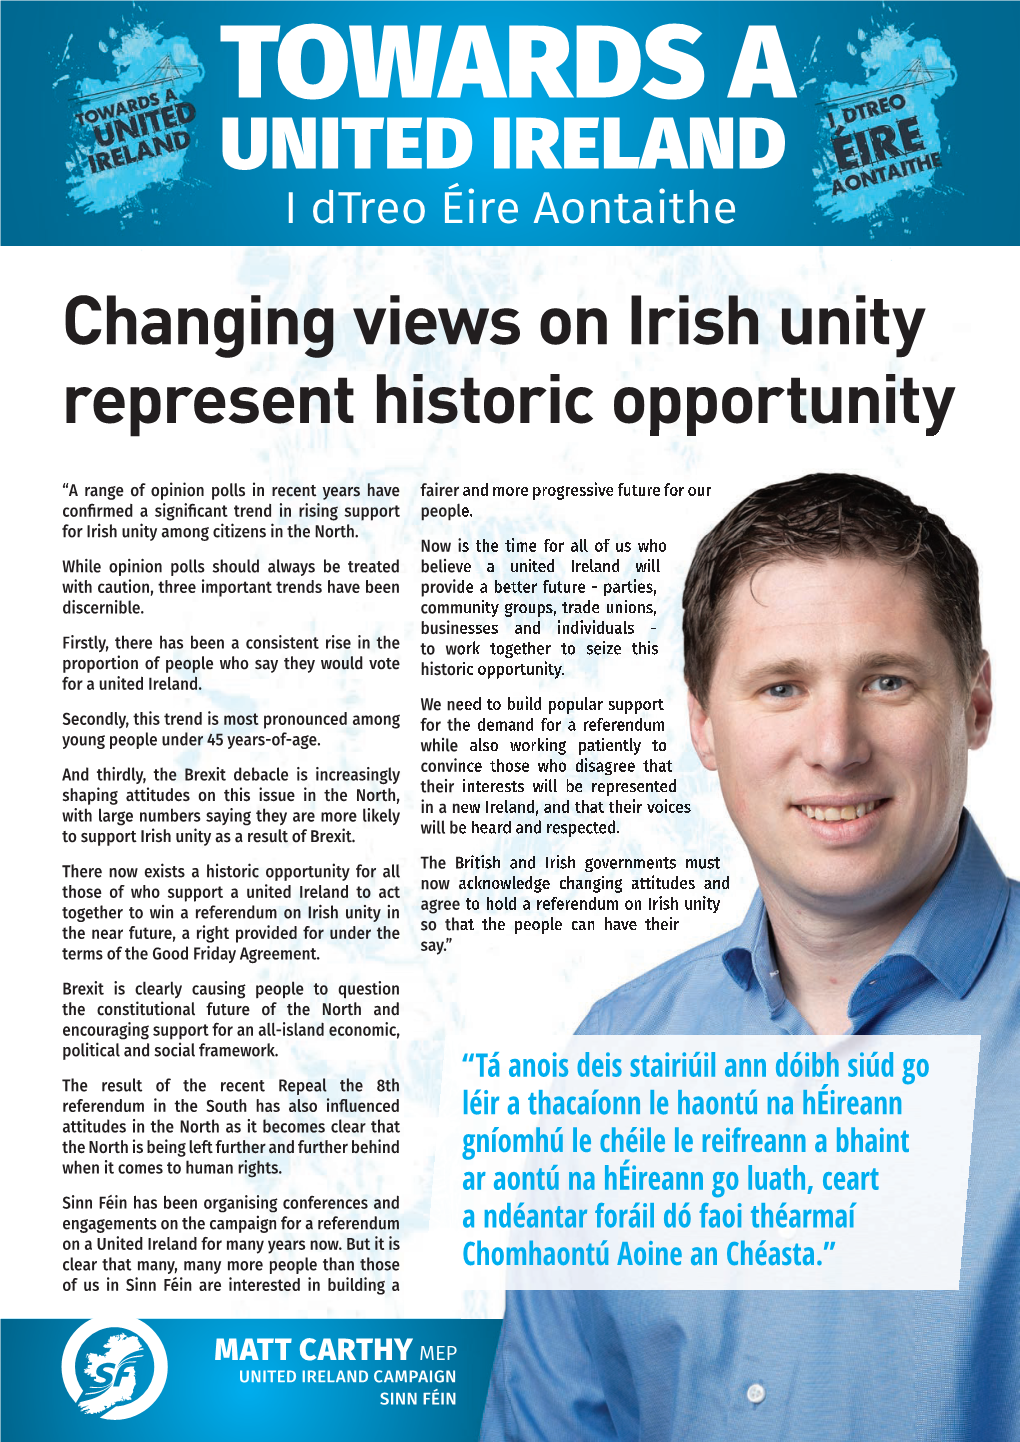 TOWARDS a UNITED IRELAND I Dtreo Éire Aontaithe Changing Views on Irish Unity Represent Historic Opportunity